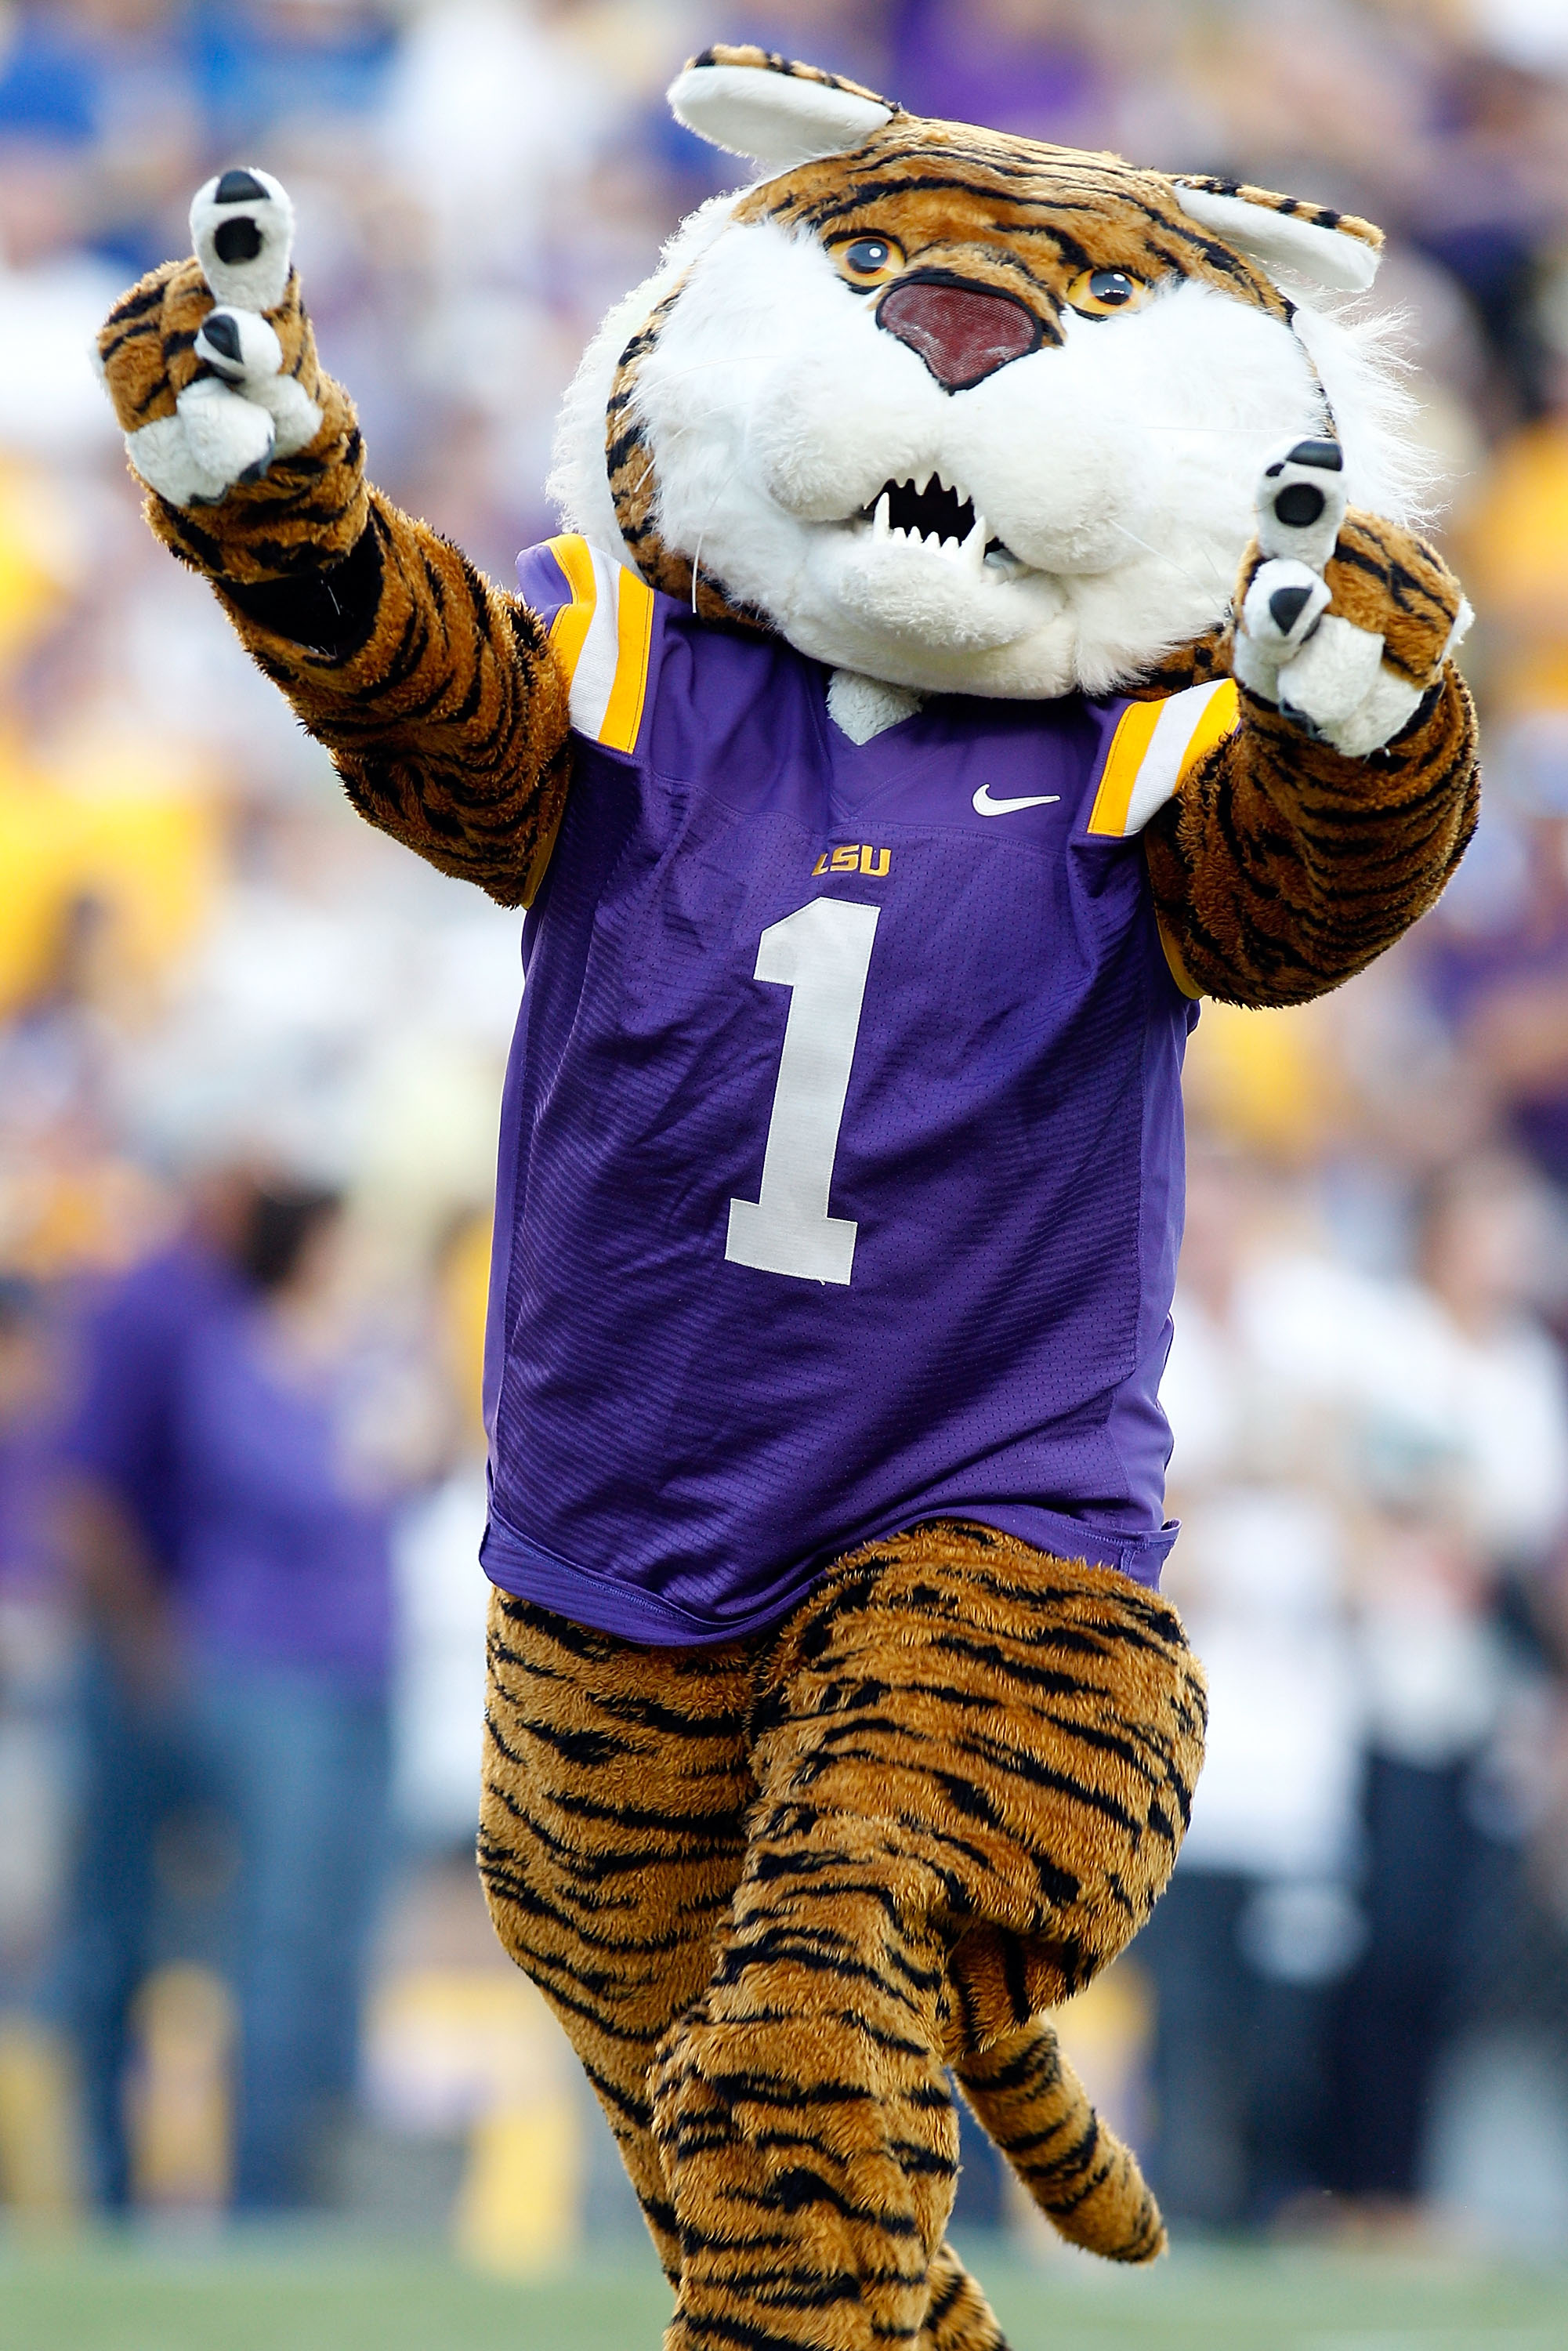 Lsu Fooball Ranking The Greatest Coaches In School History Bleacher Report Latest News